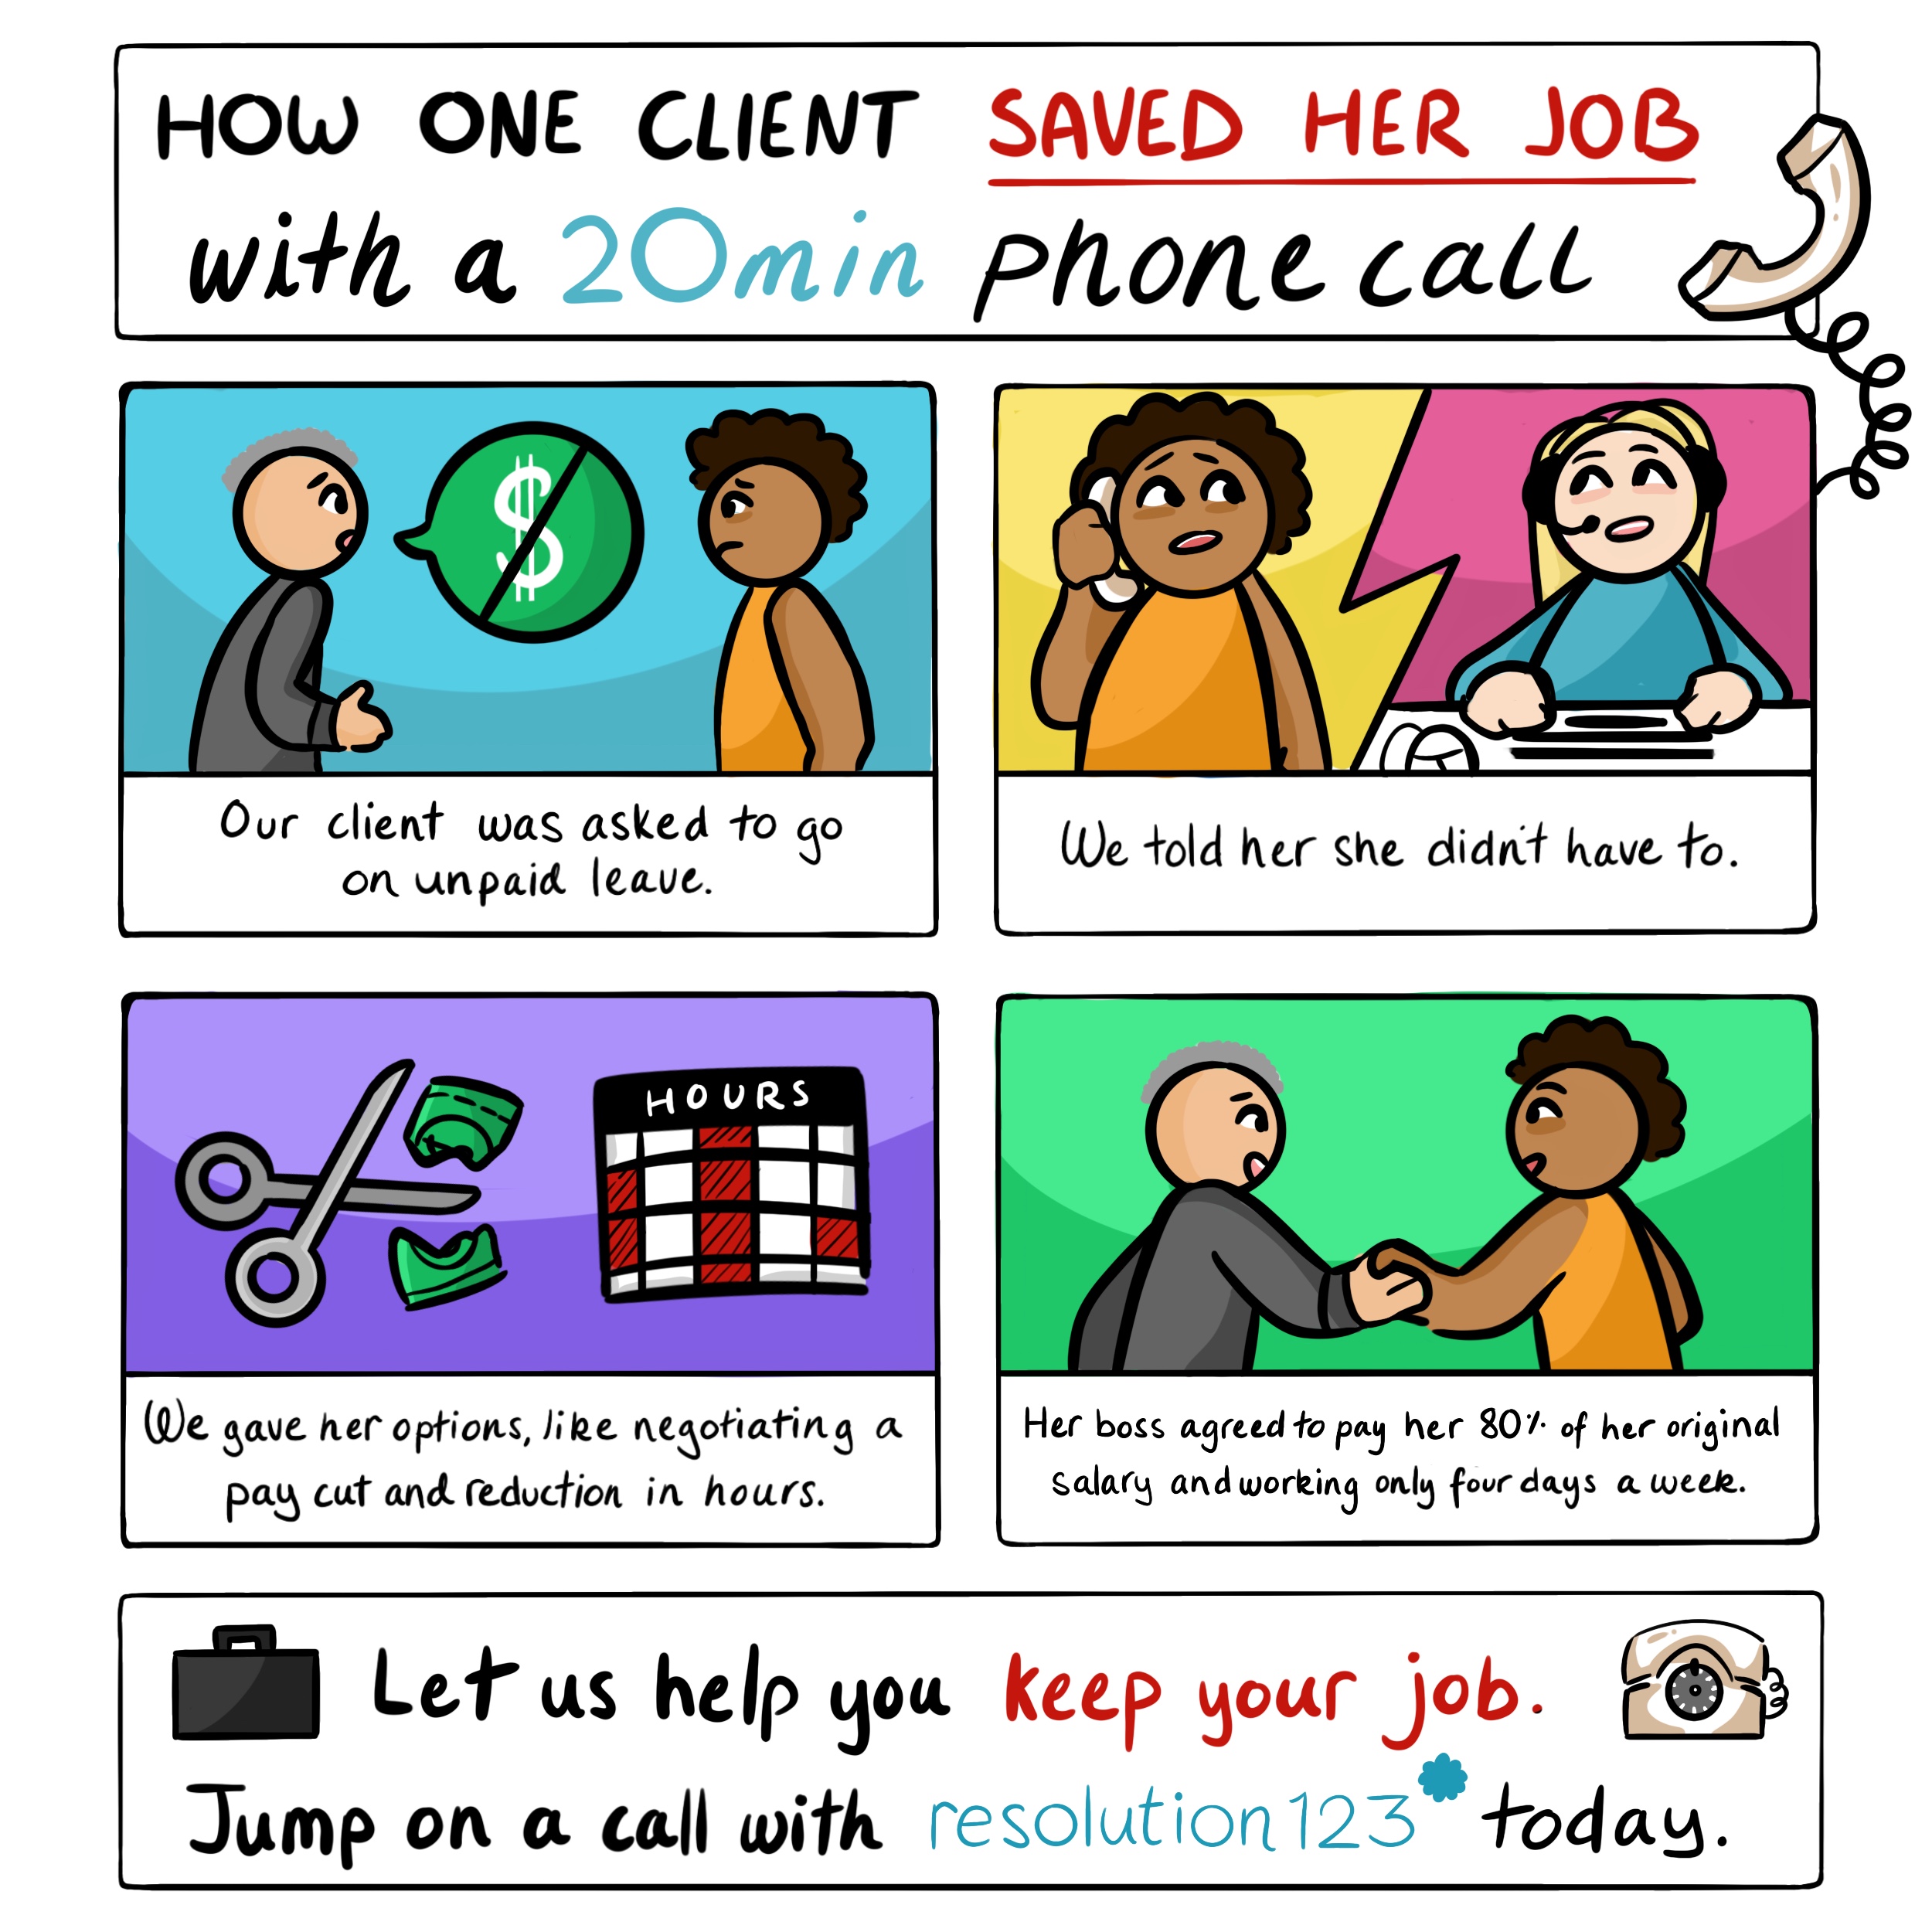 How Our Client Saved Her Job During COVID-19 with a 20min Phone Call